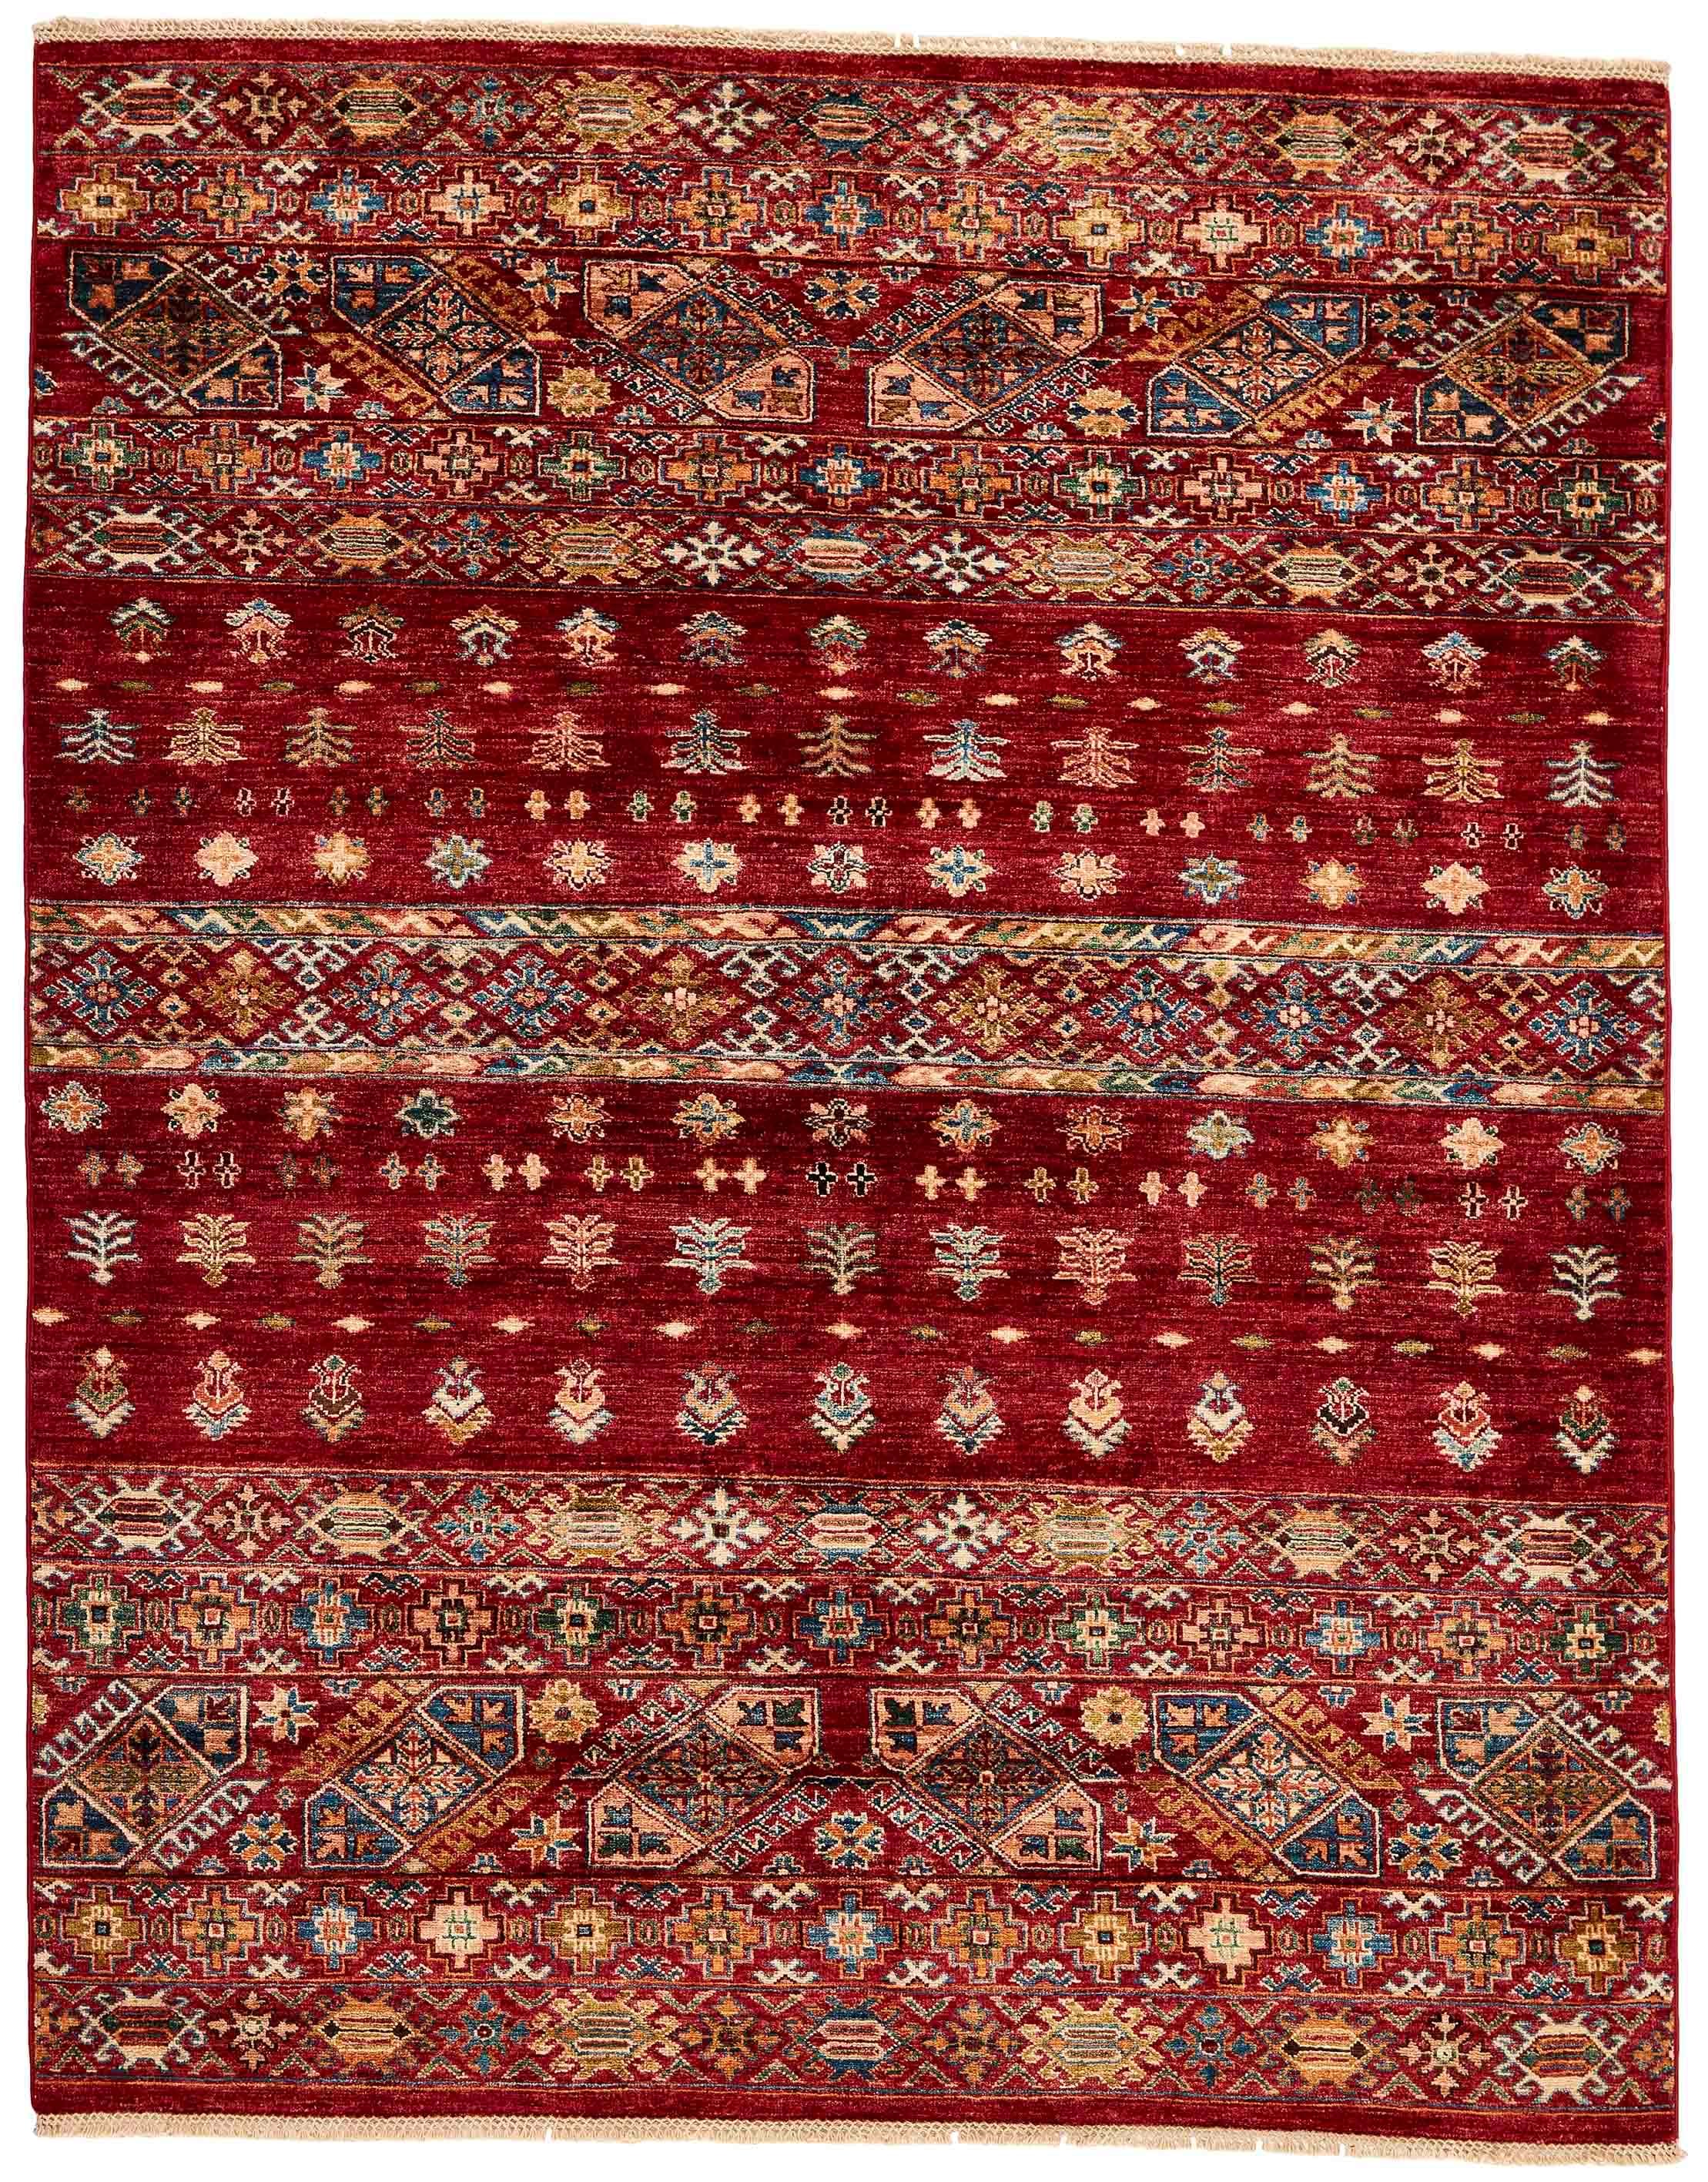 Authentic oriental rug with traditional tile pattern in red, yellow, blue, green, beige and brown